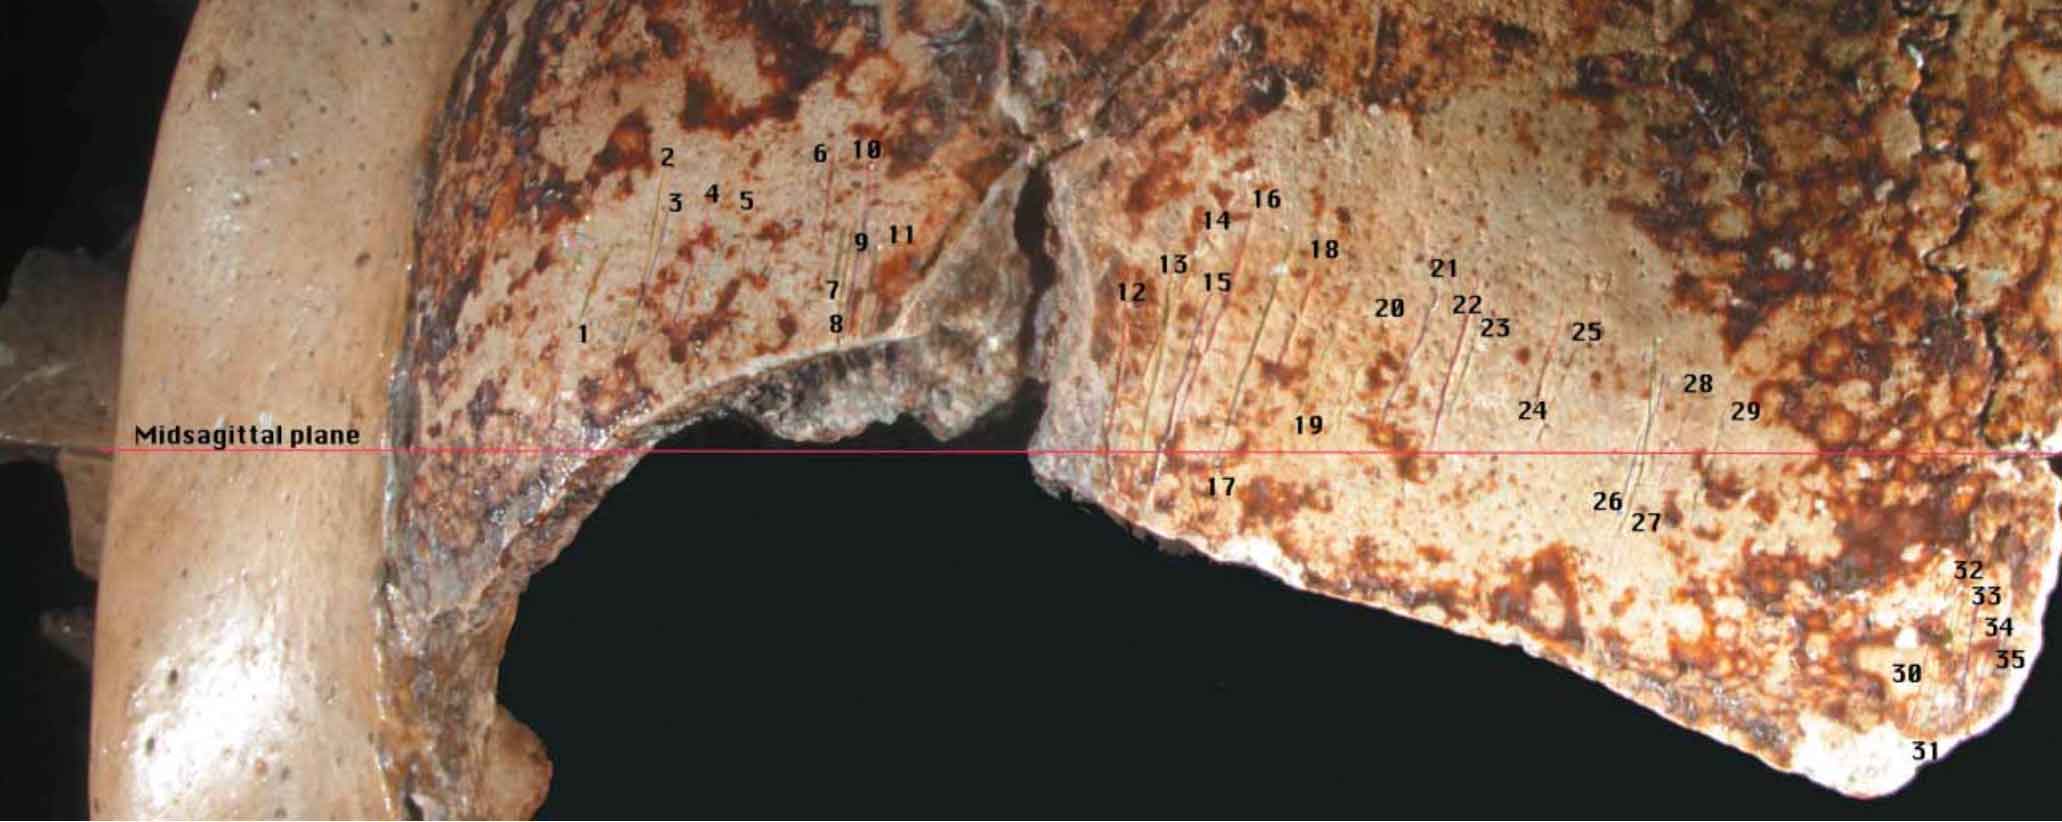 The frontal bone of Krapina 3 with cutmarks indicated by numbers and the midsagittal plane marked